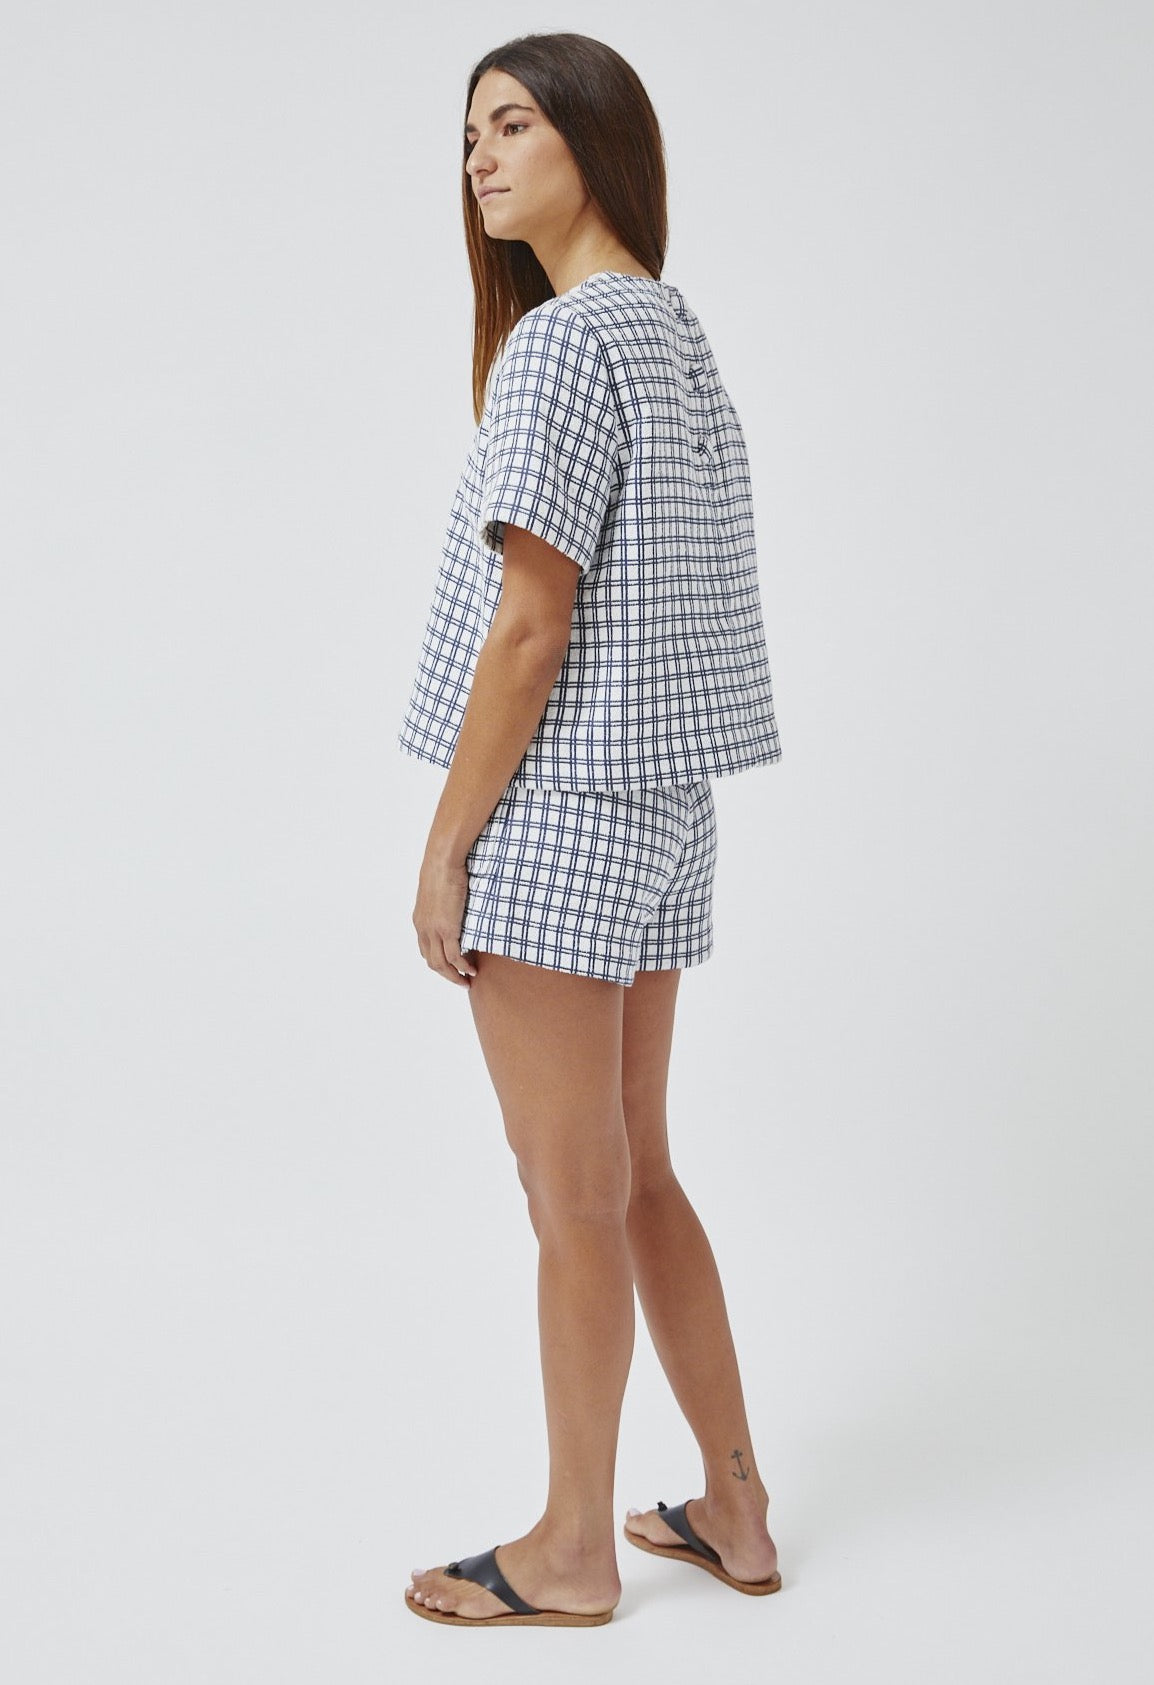 THE TRAPEZE T-SHIRT in NAVY & WHITE CHECK COTTON JACQUARD